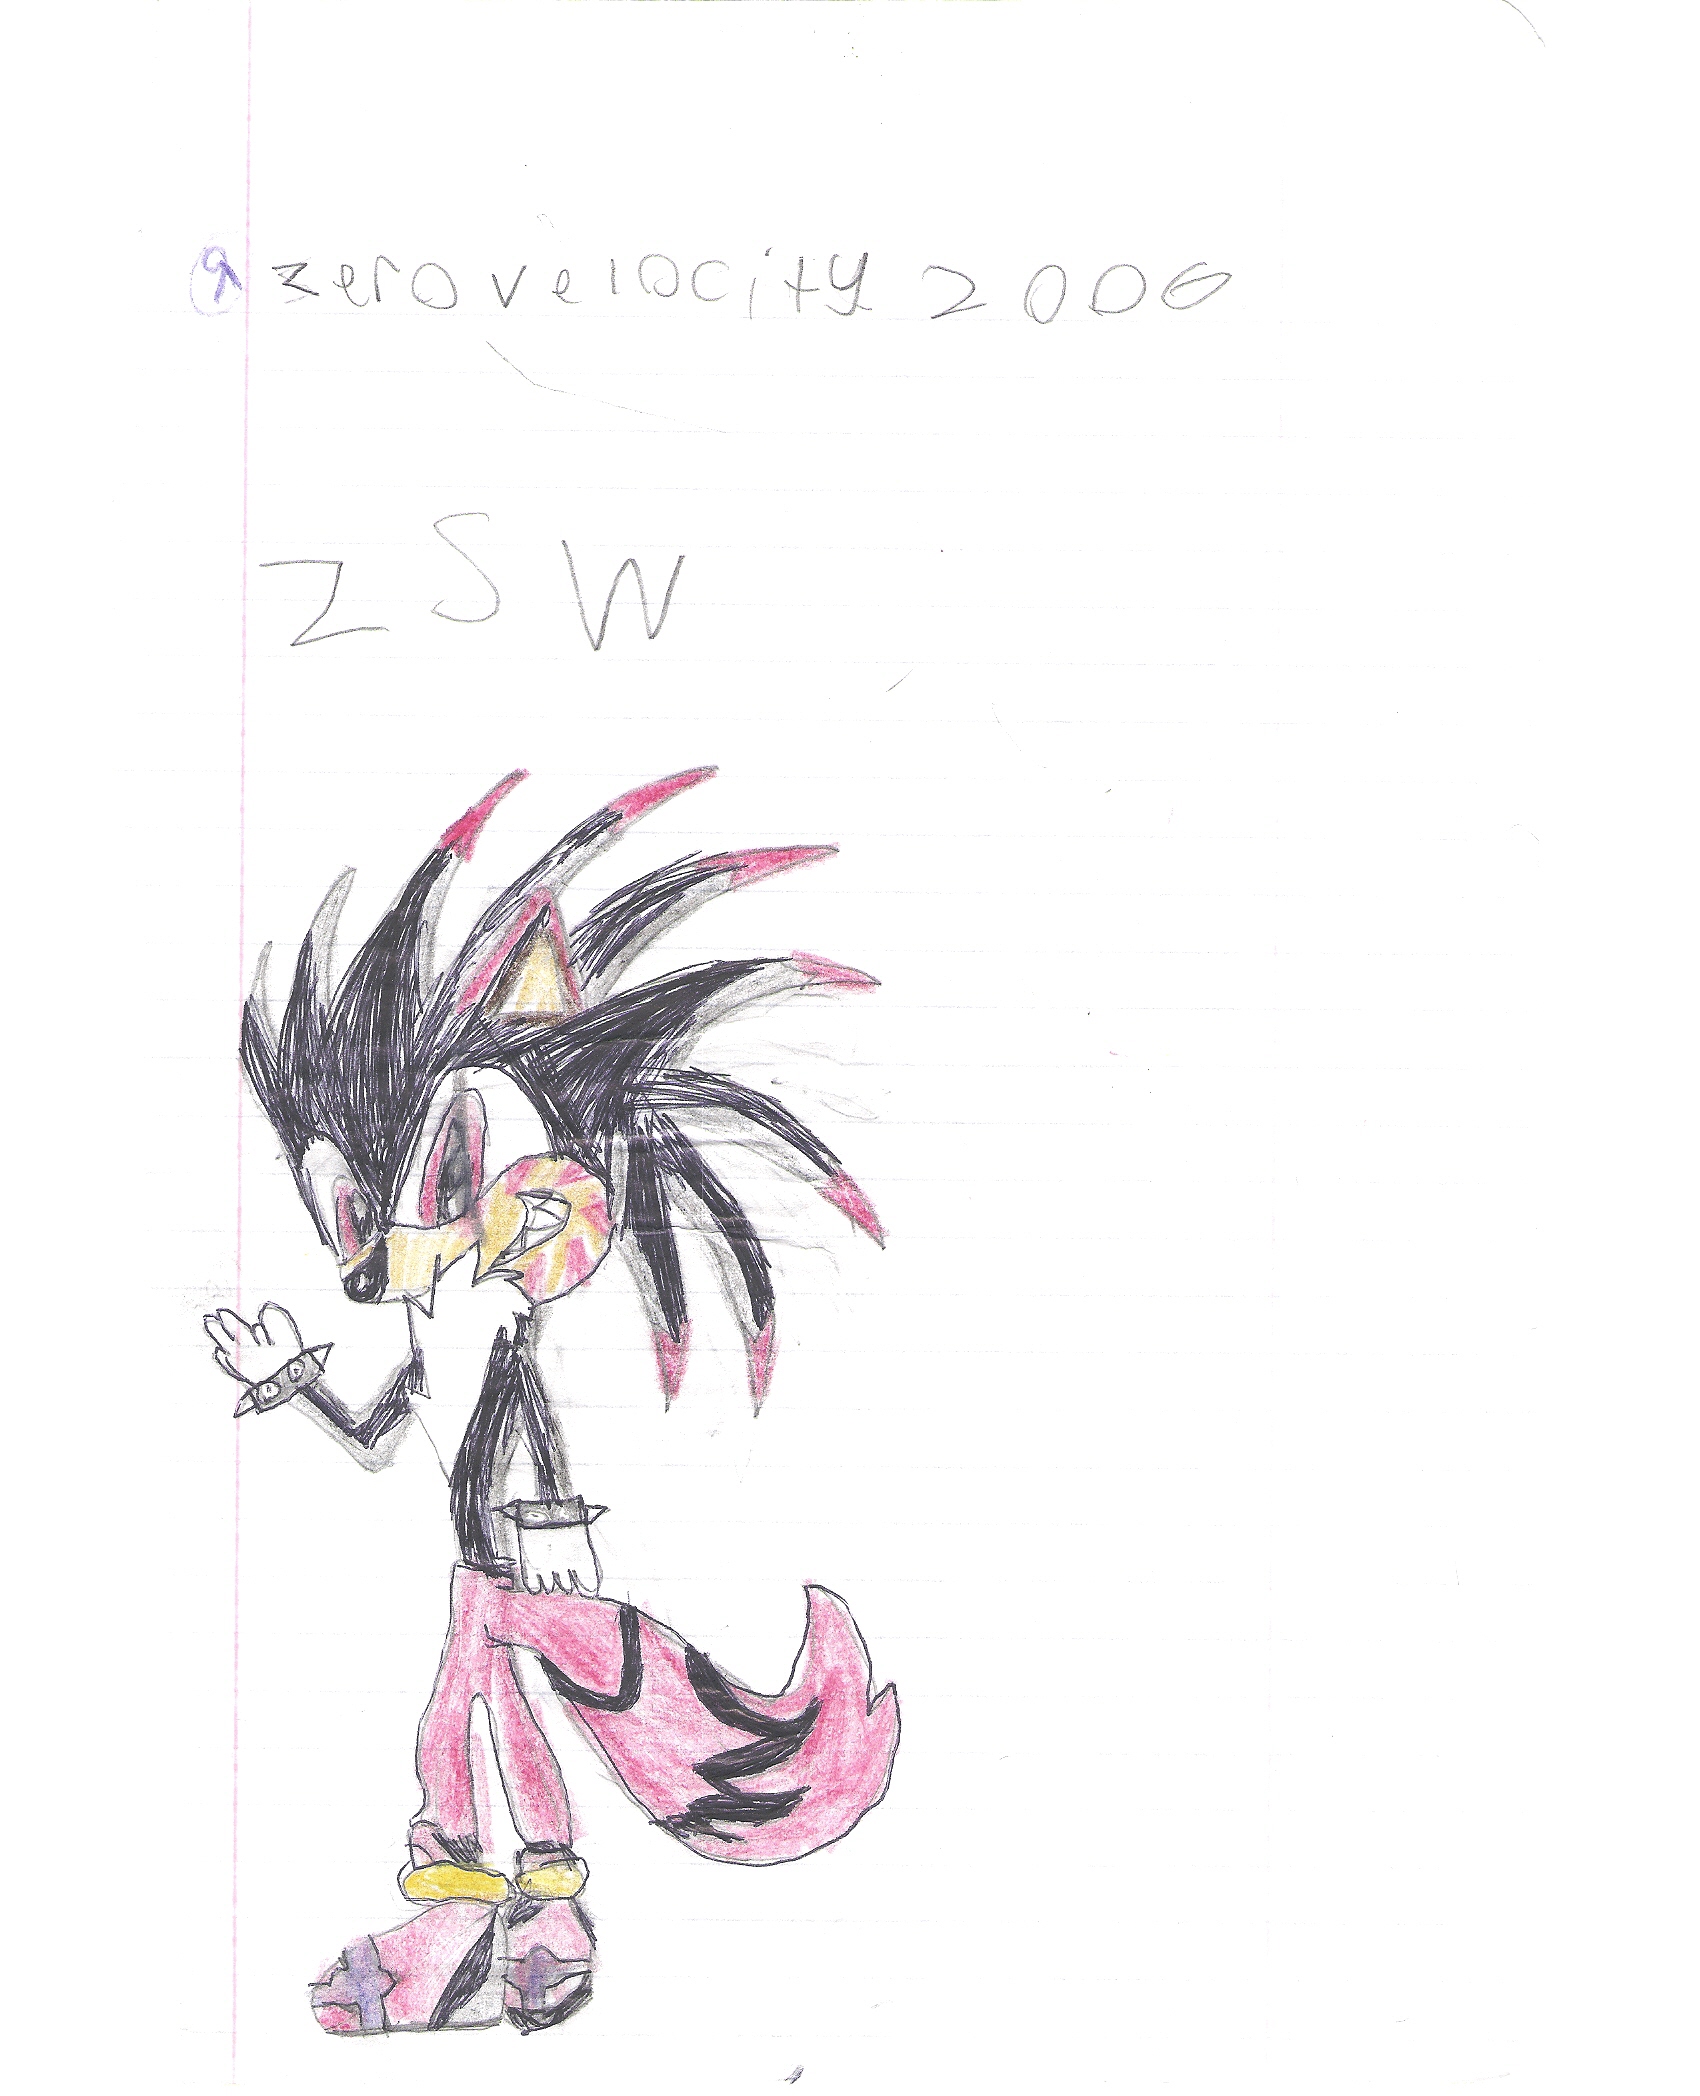 First design of zsw by ShadowHedgehog